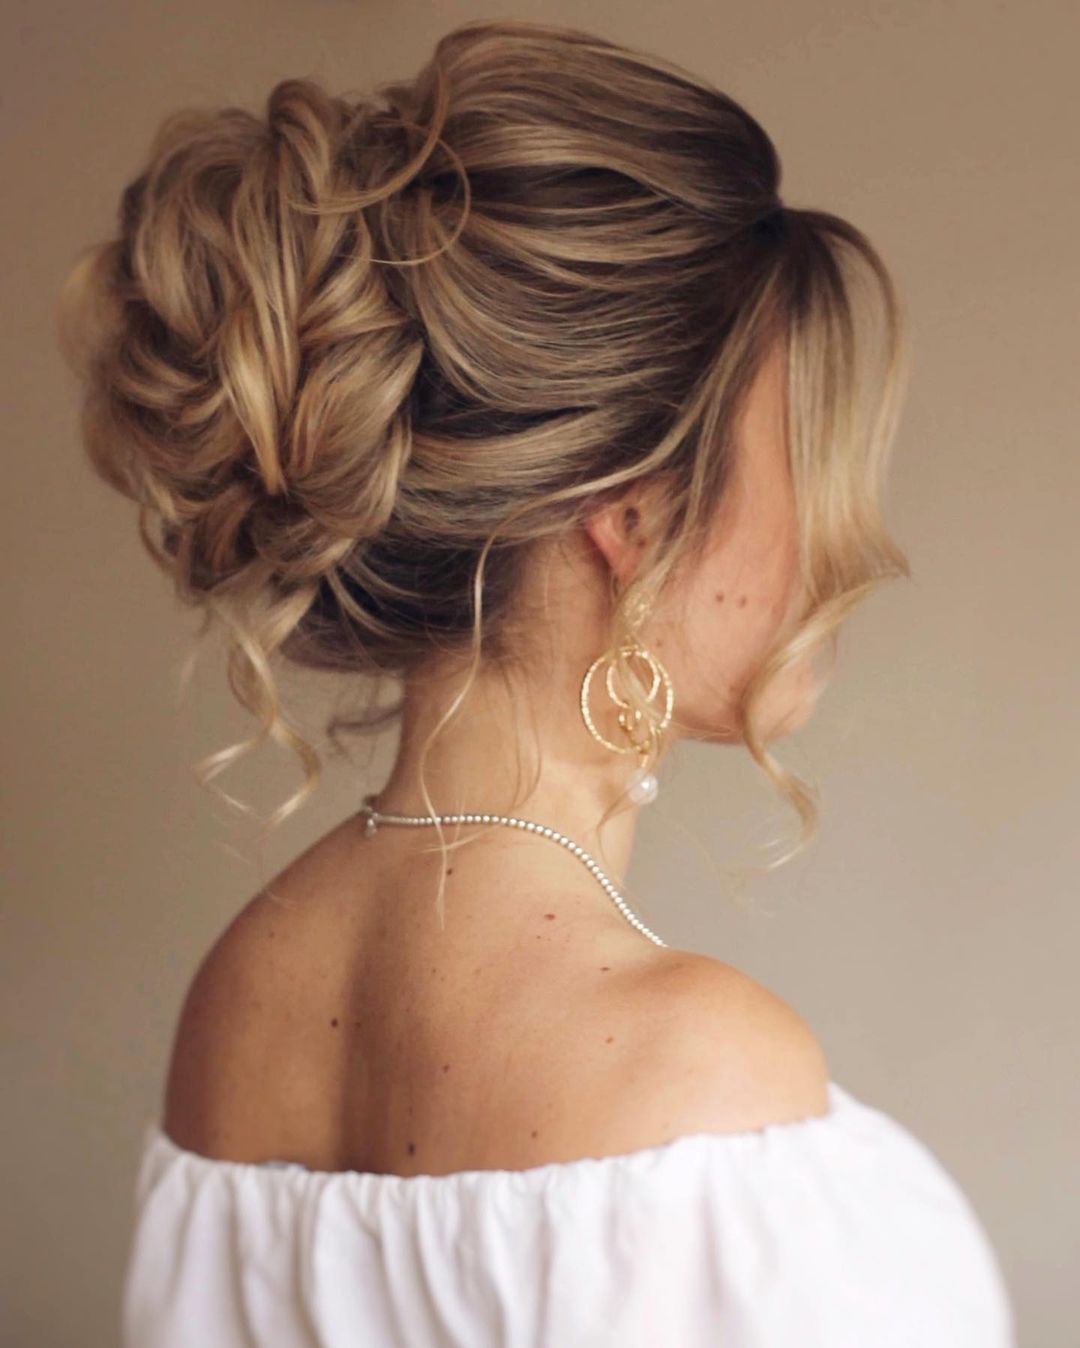 7 Classic, Simple Prom Hairstyles for All Hair Lengths